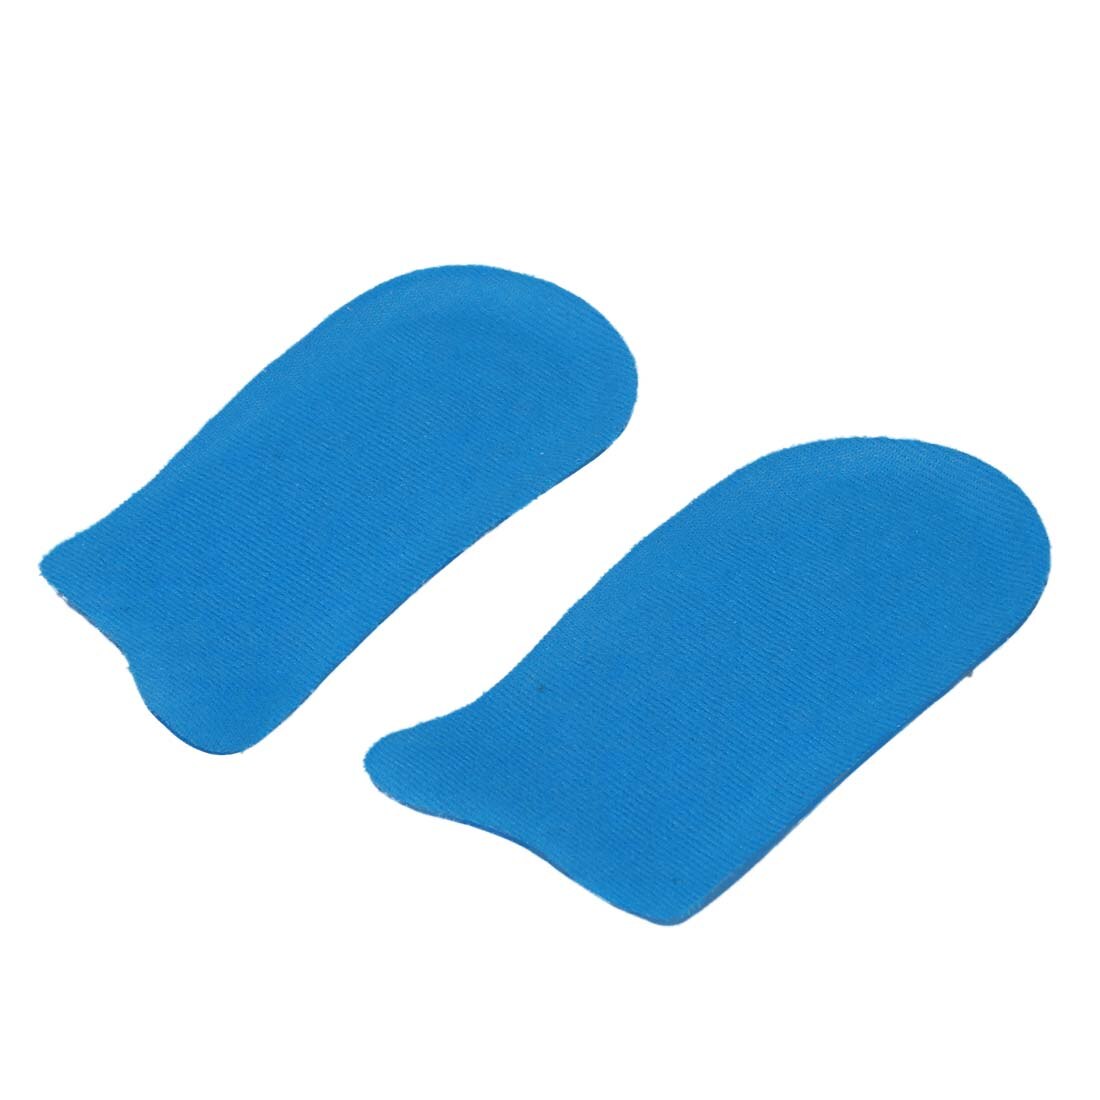 Pairlight Blue Silicone Gel Insole Best Heel Pad Insertion 4.3 cm Up - ebowsos